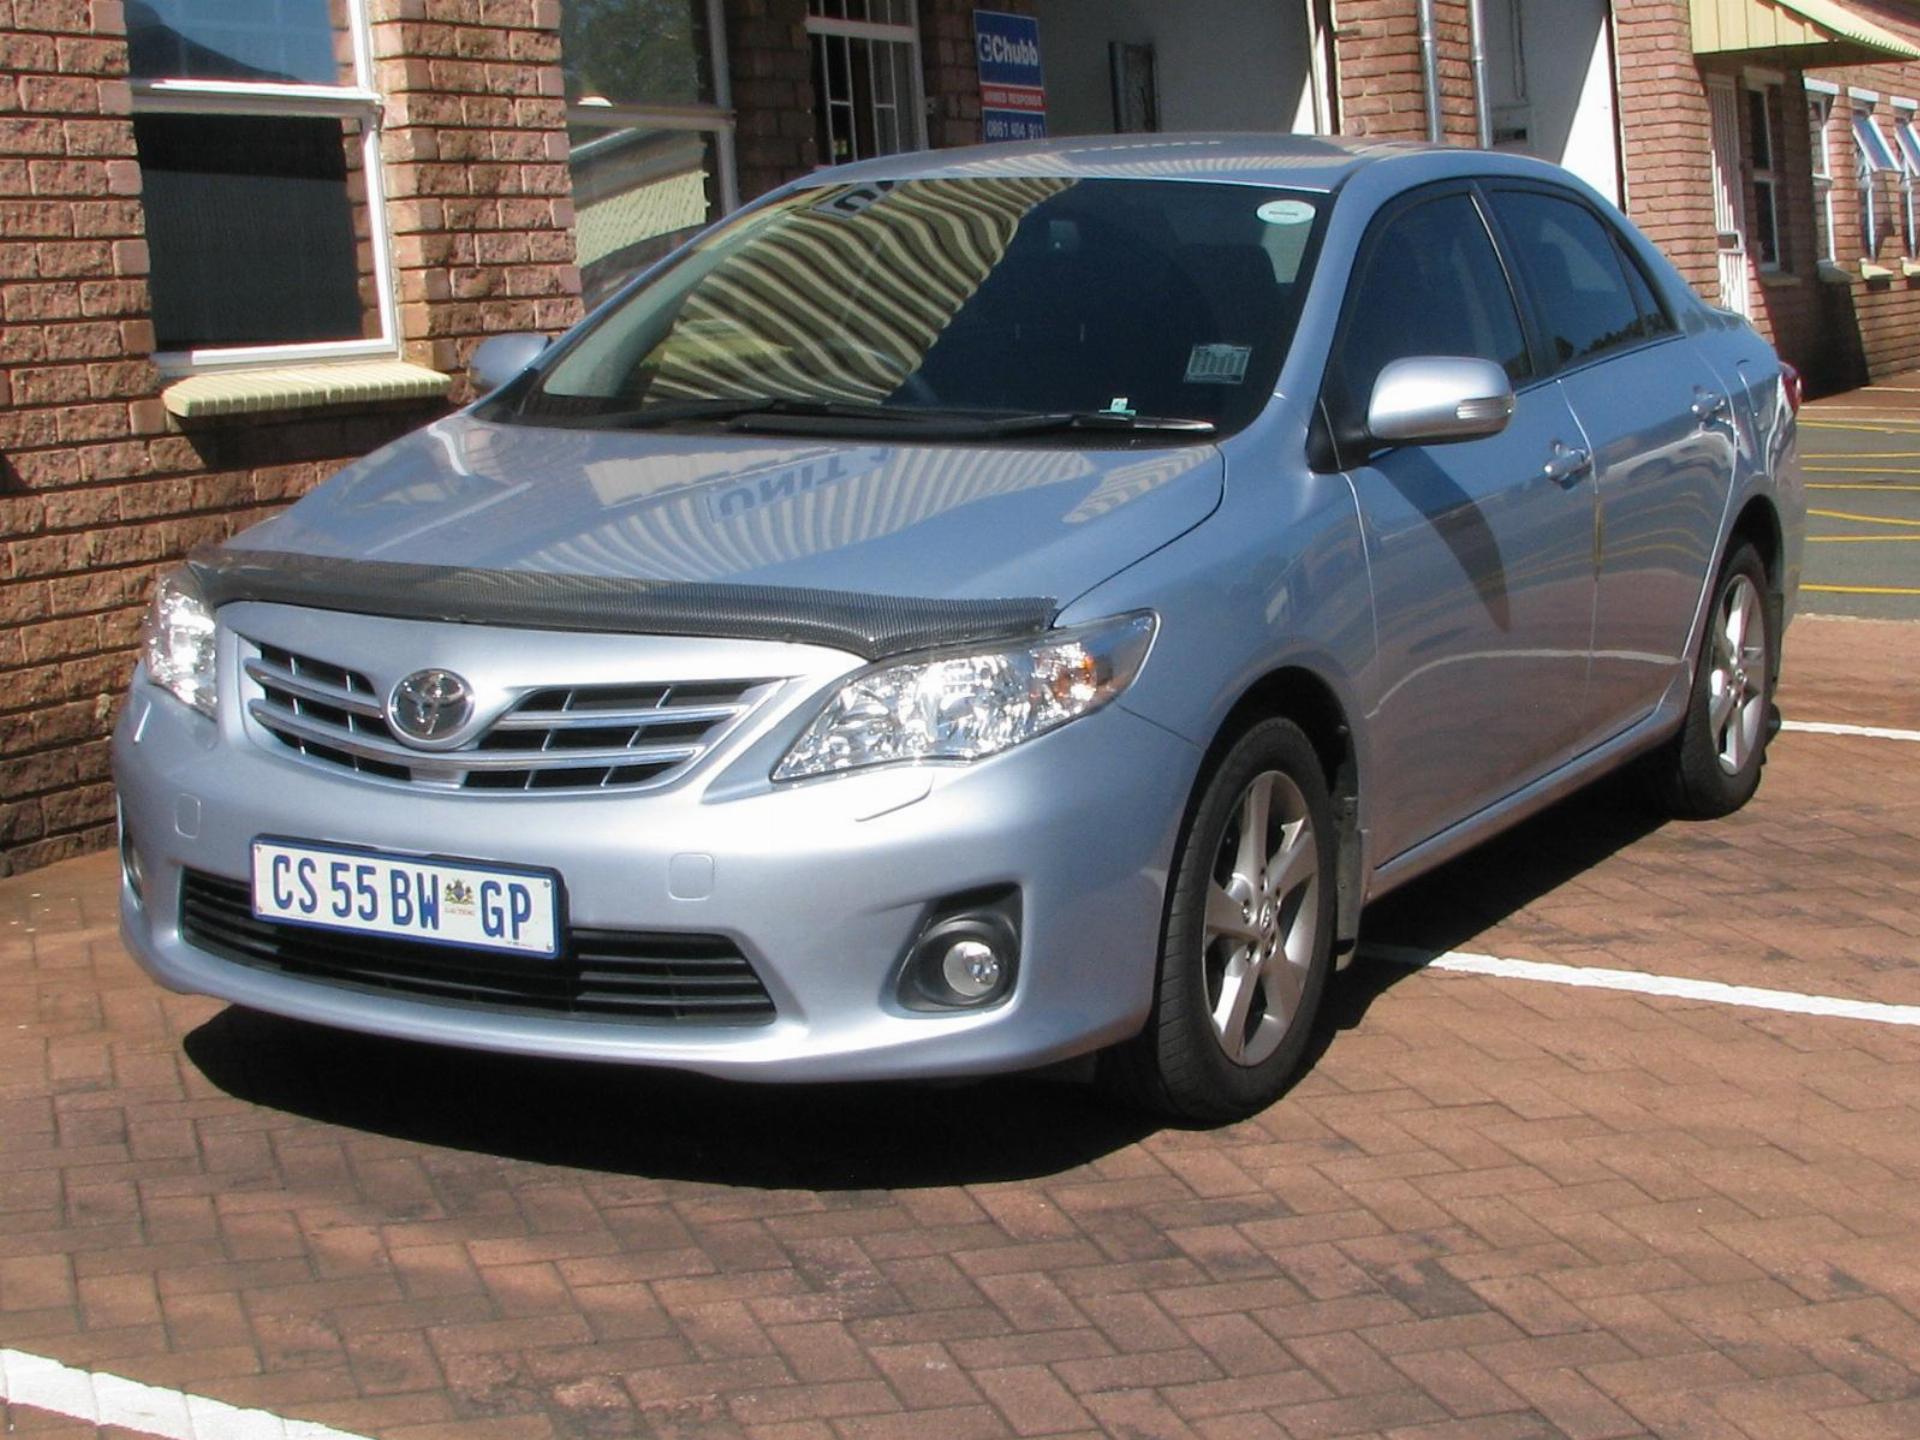 Used Toyota Corolla 2.0 D4D Exclusive 2013 on auction